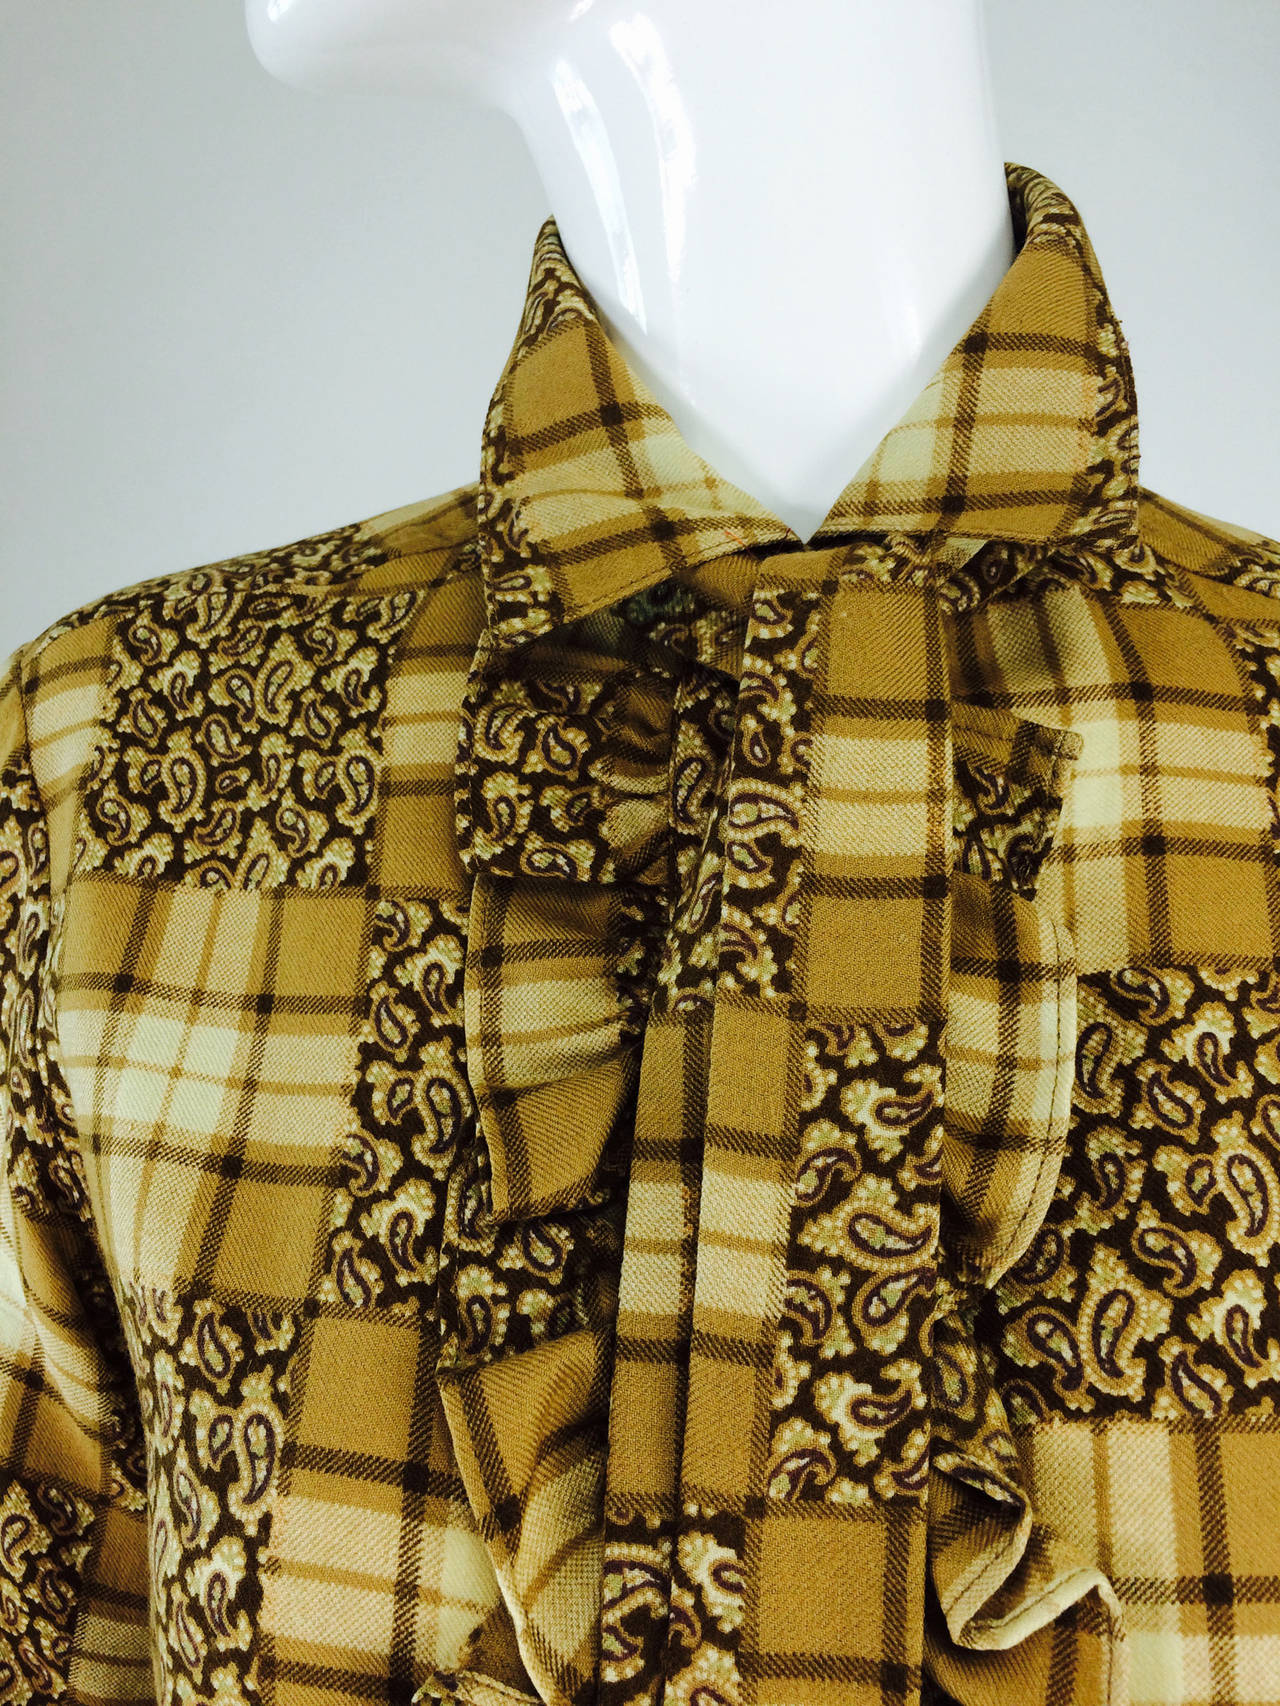 Yves St Laurent Rive Gauche tan plaid ruffle front blouse 1970s...Fine, soft wool challis, almost feels like cotton flannel...Plaid print with squares of paisley throughout...The blouse is long sleeved with button cuffs, ruffles at either upper side